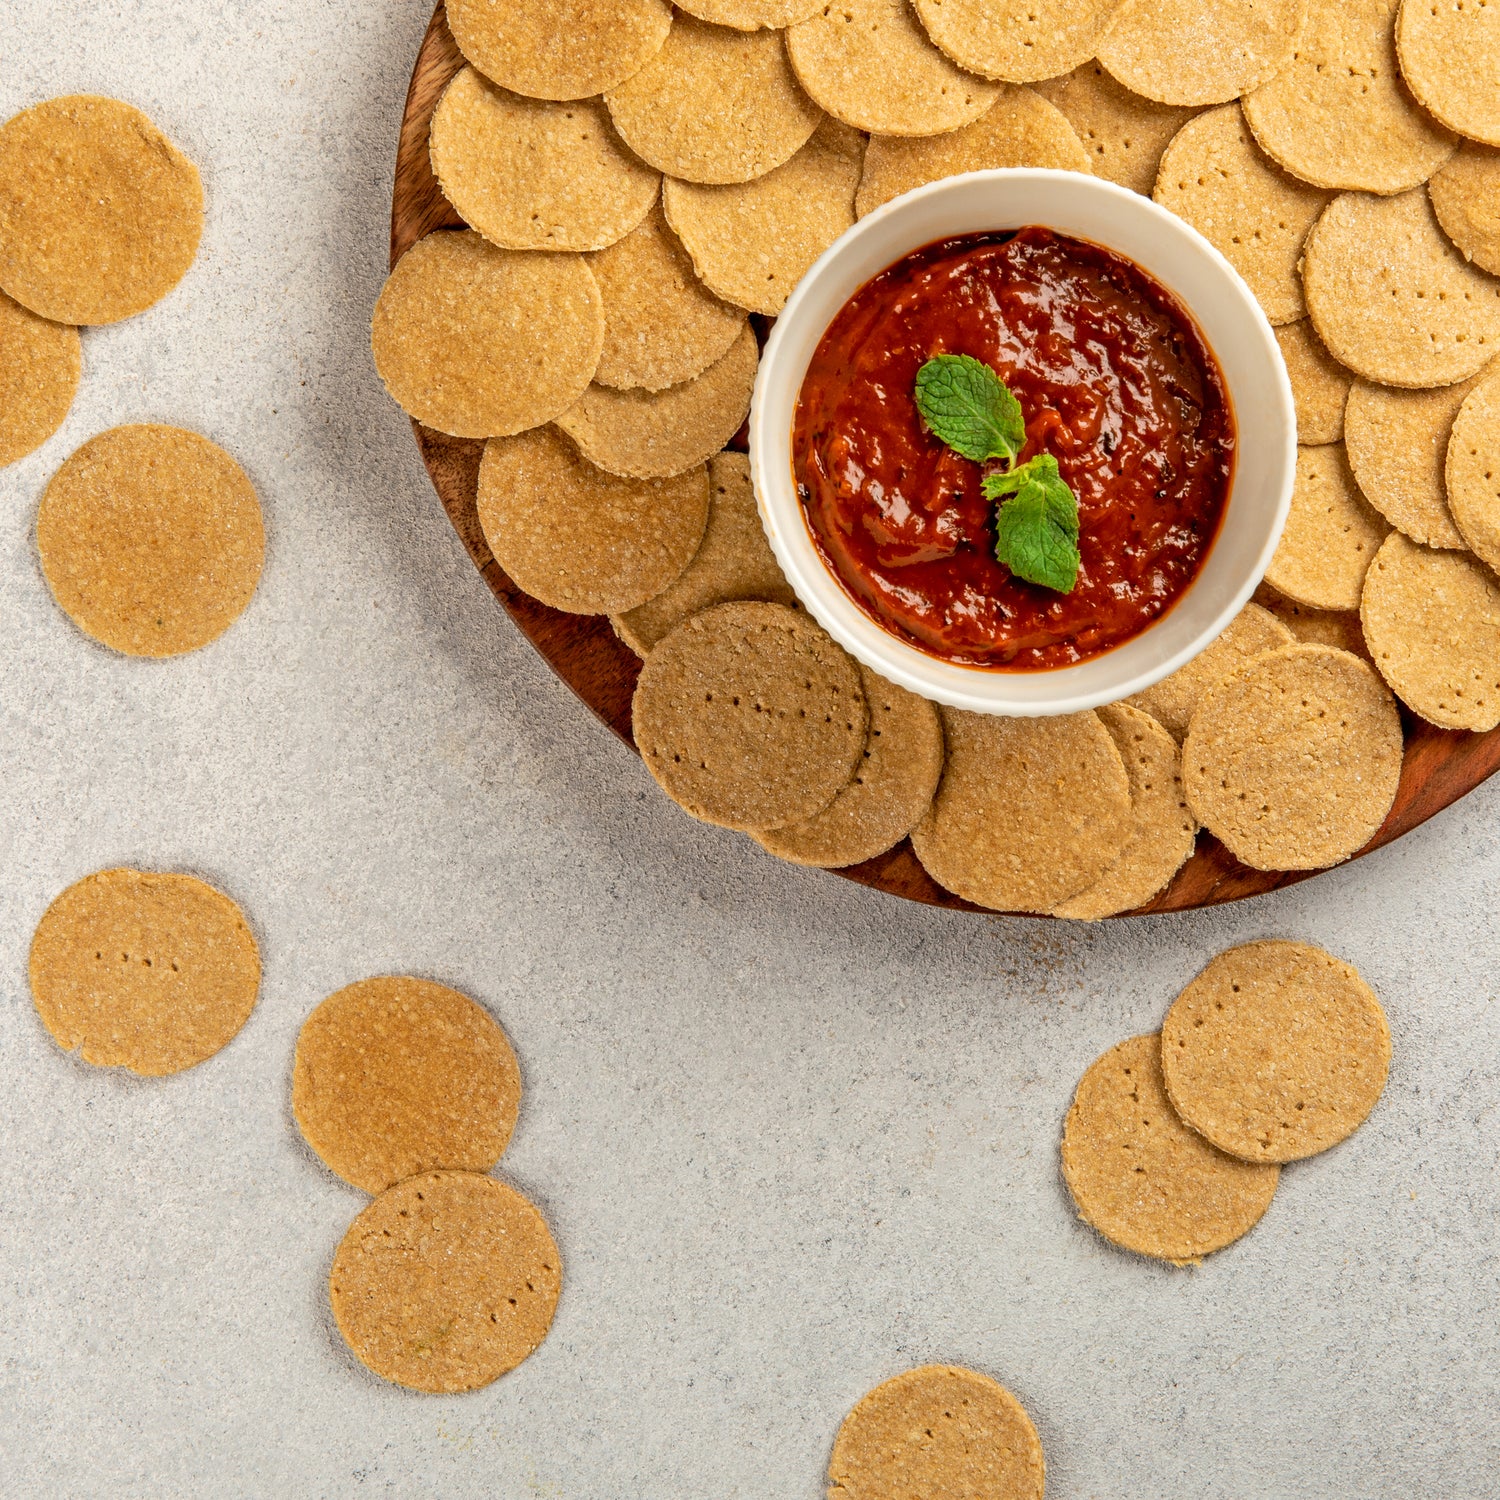 Oats Amaranth crackers with a dip